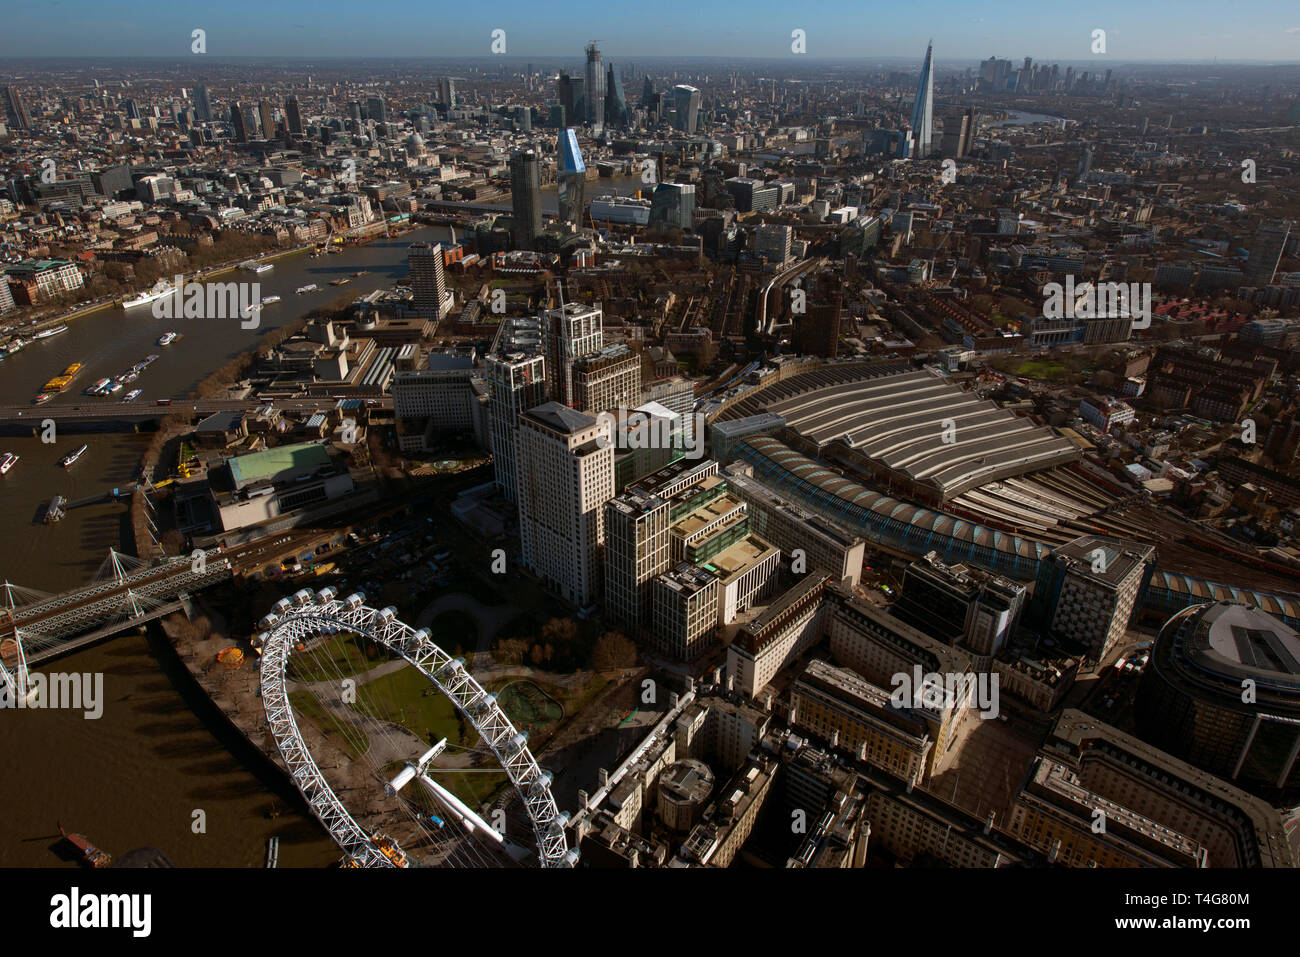 London and the Waterloo area Stock Photo